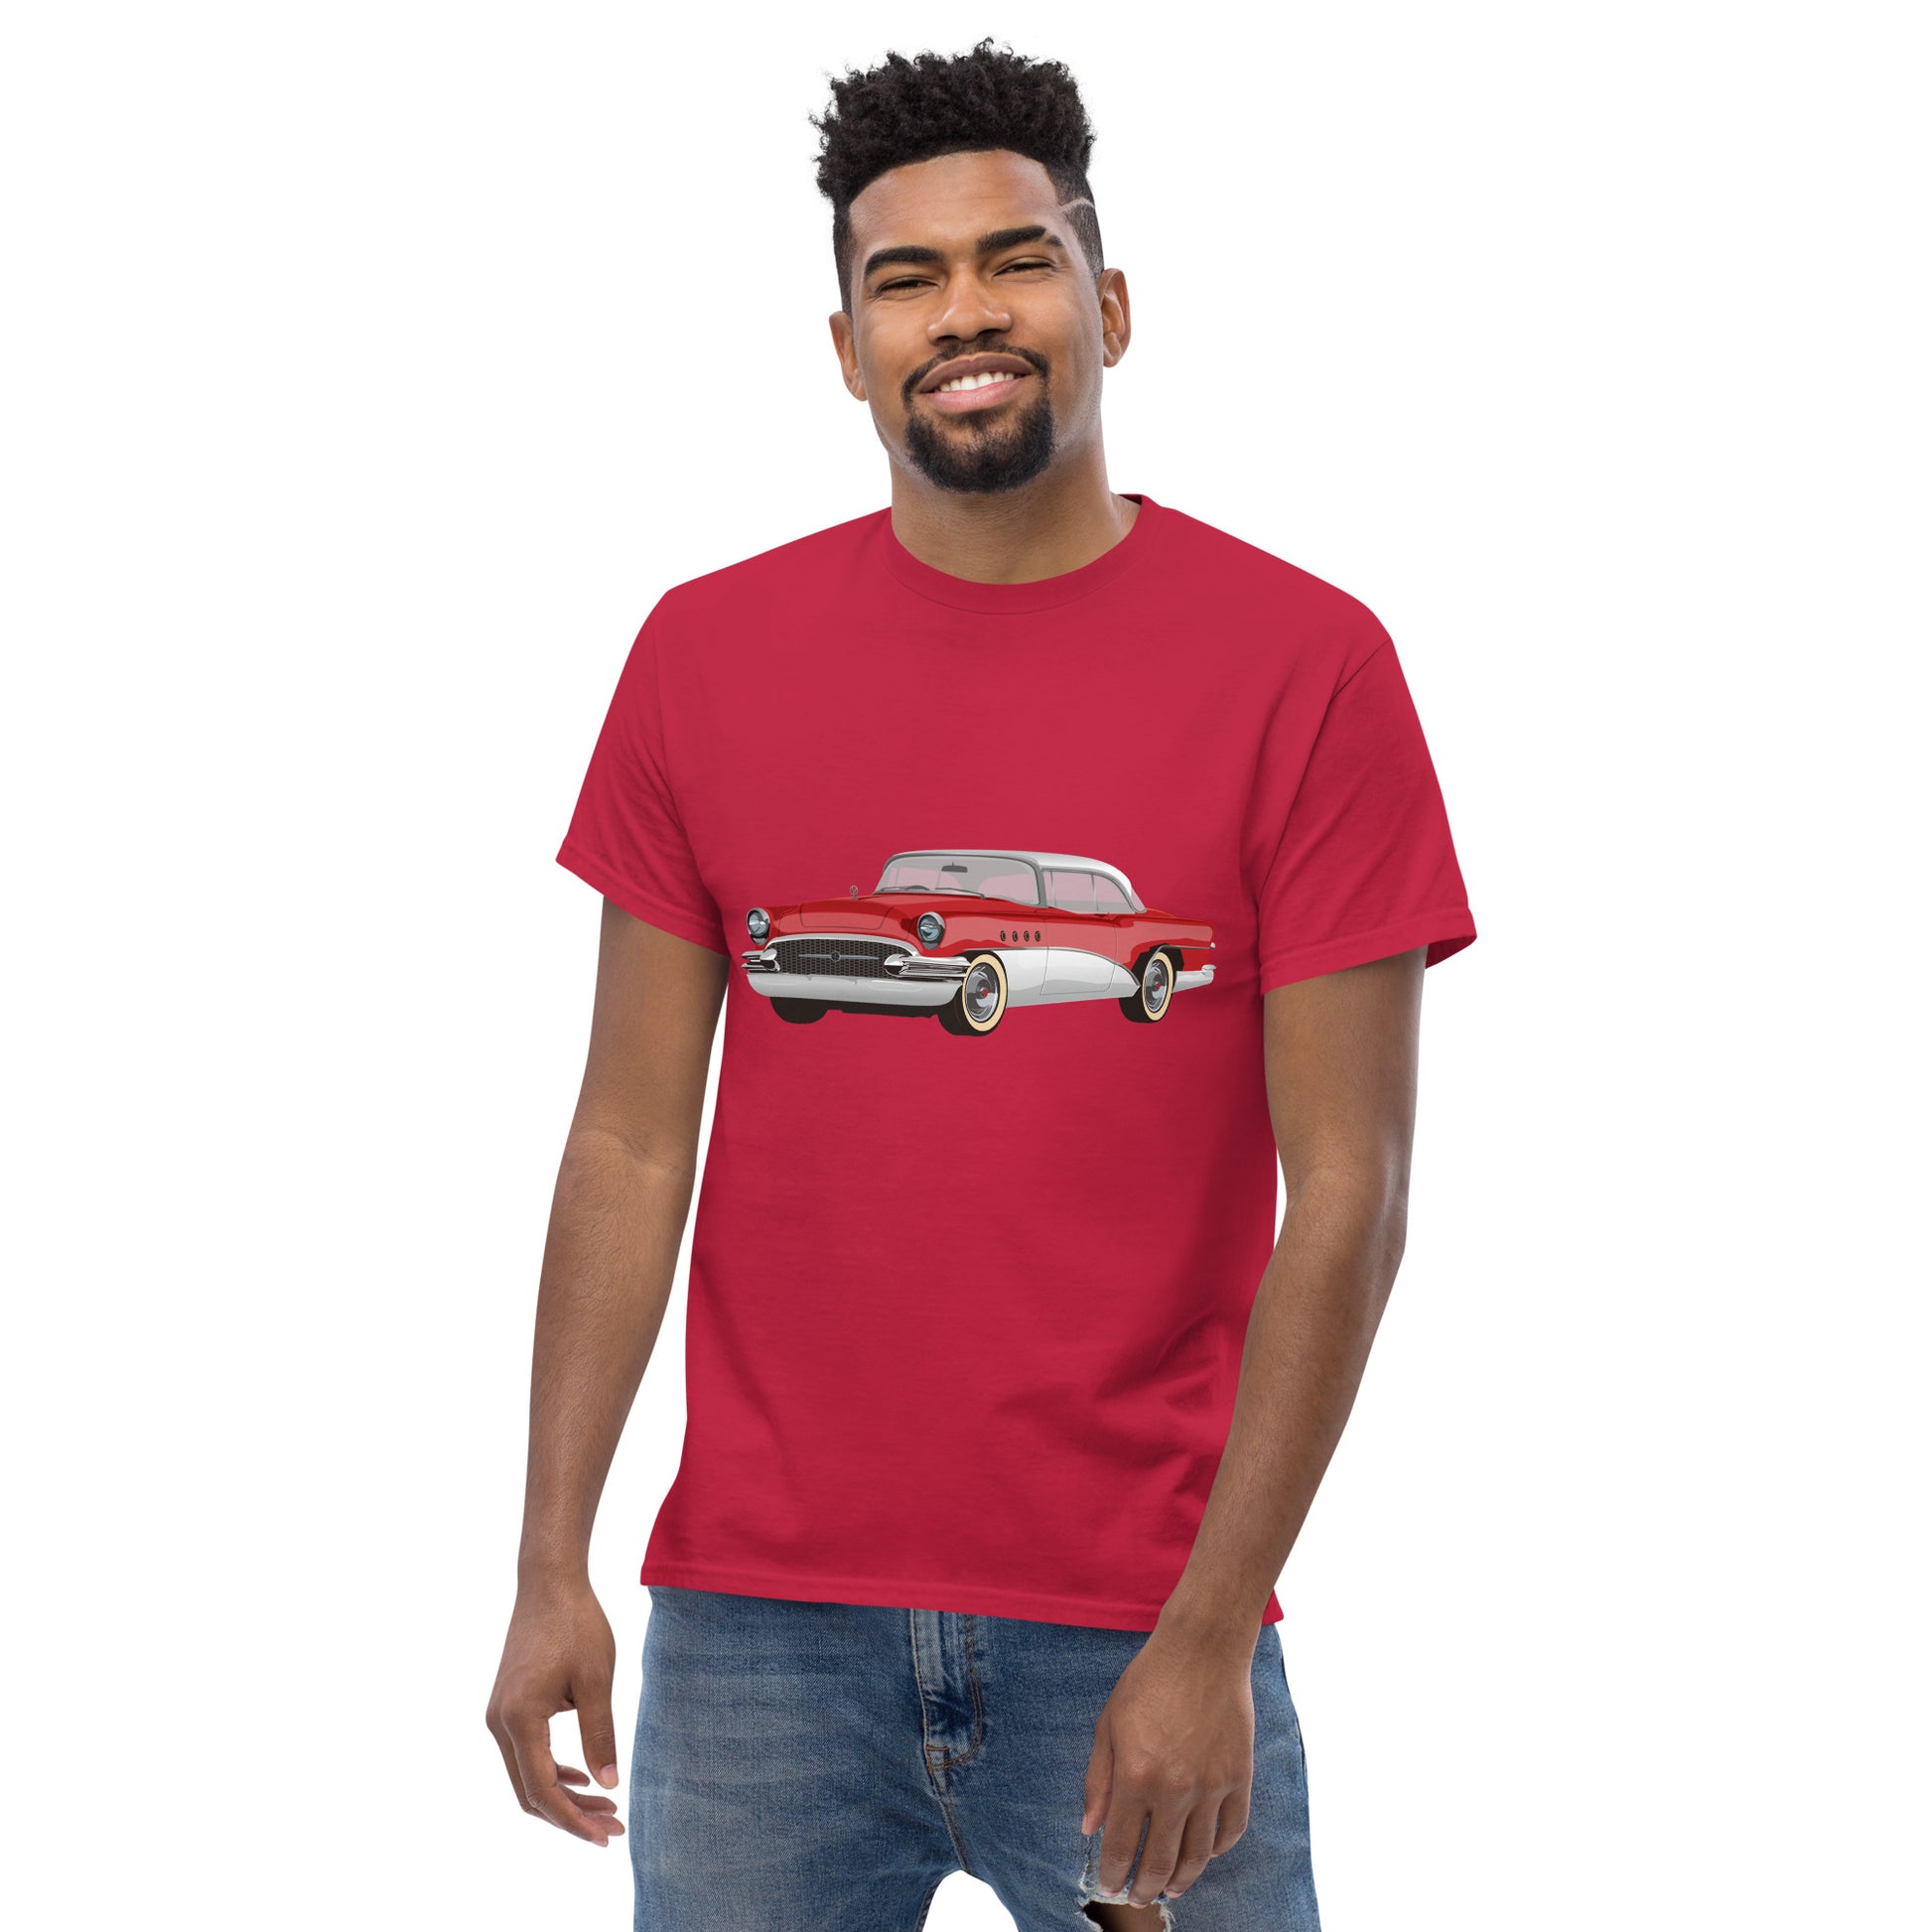 Men with cardinal red t-shirt with red Chevrolet 